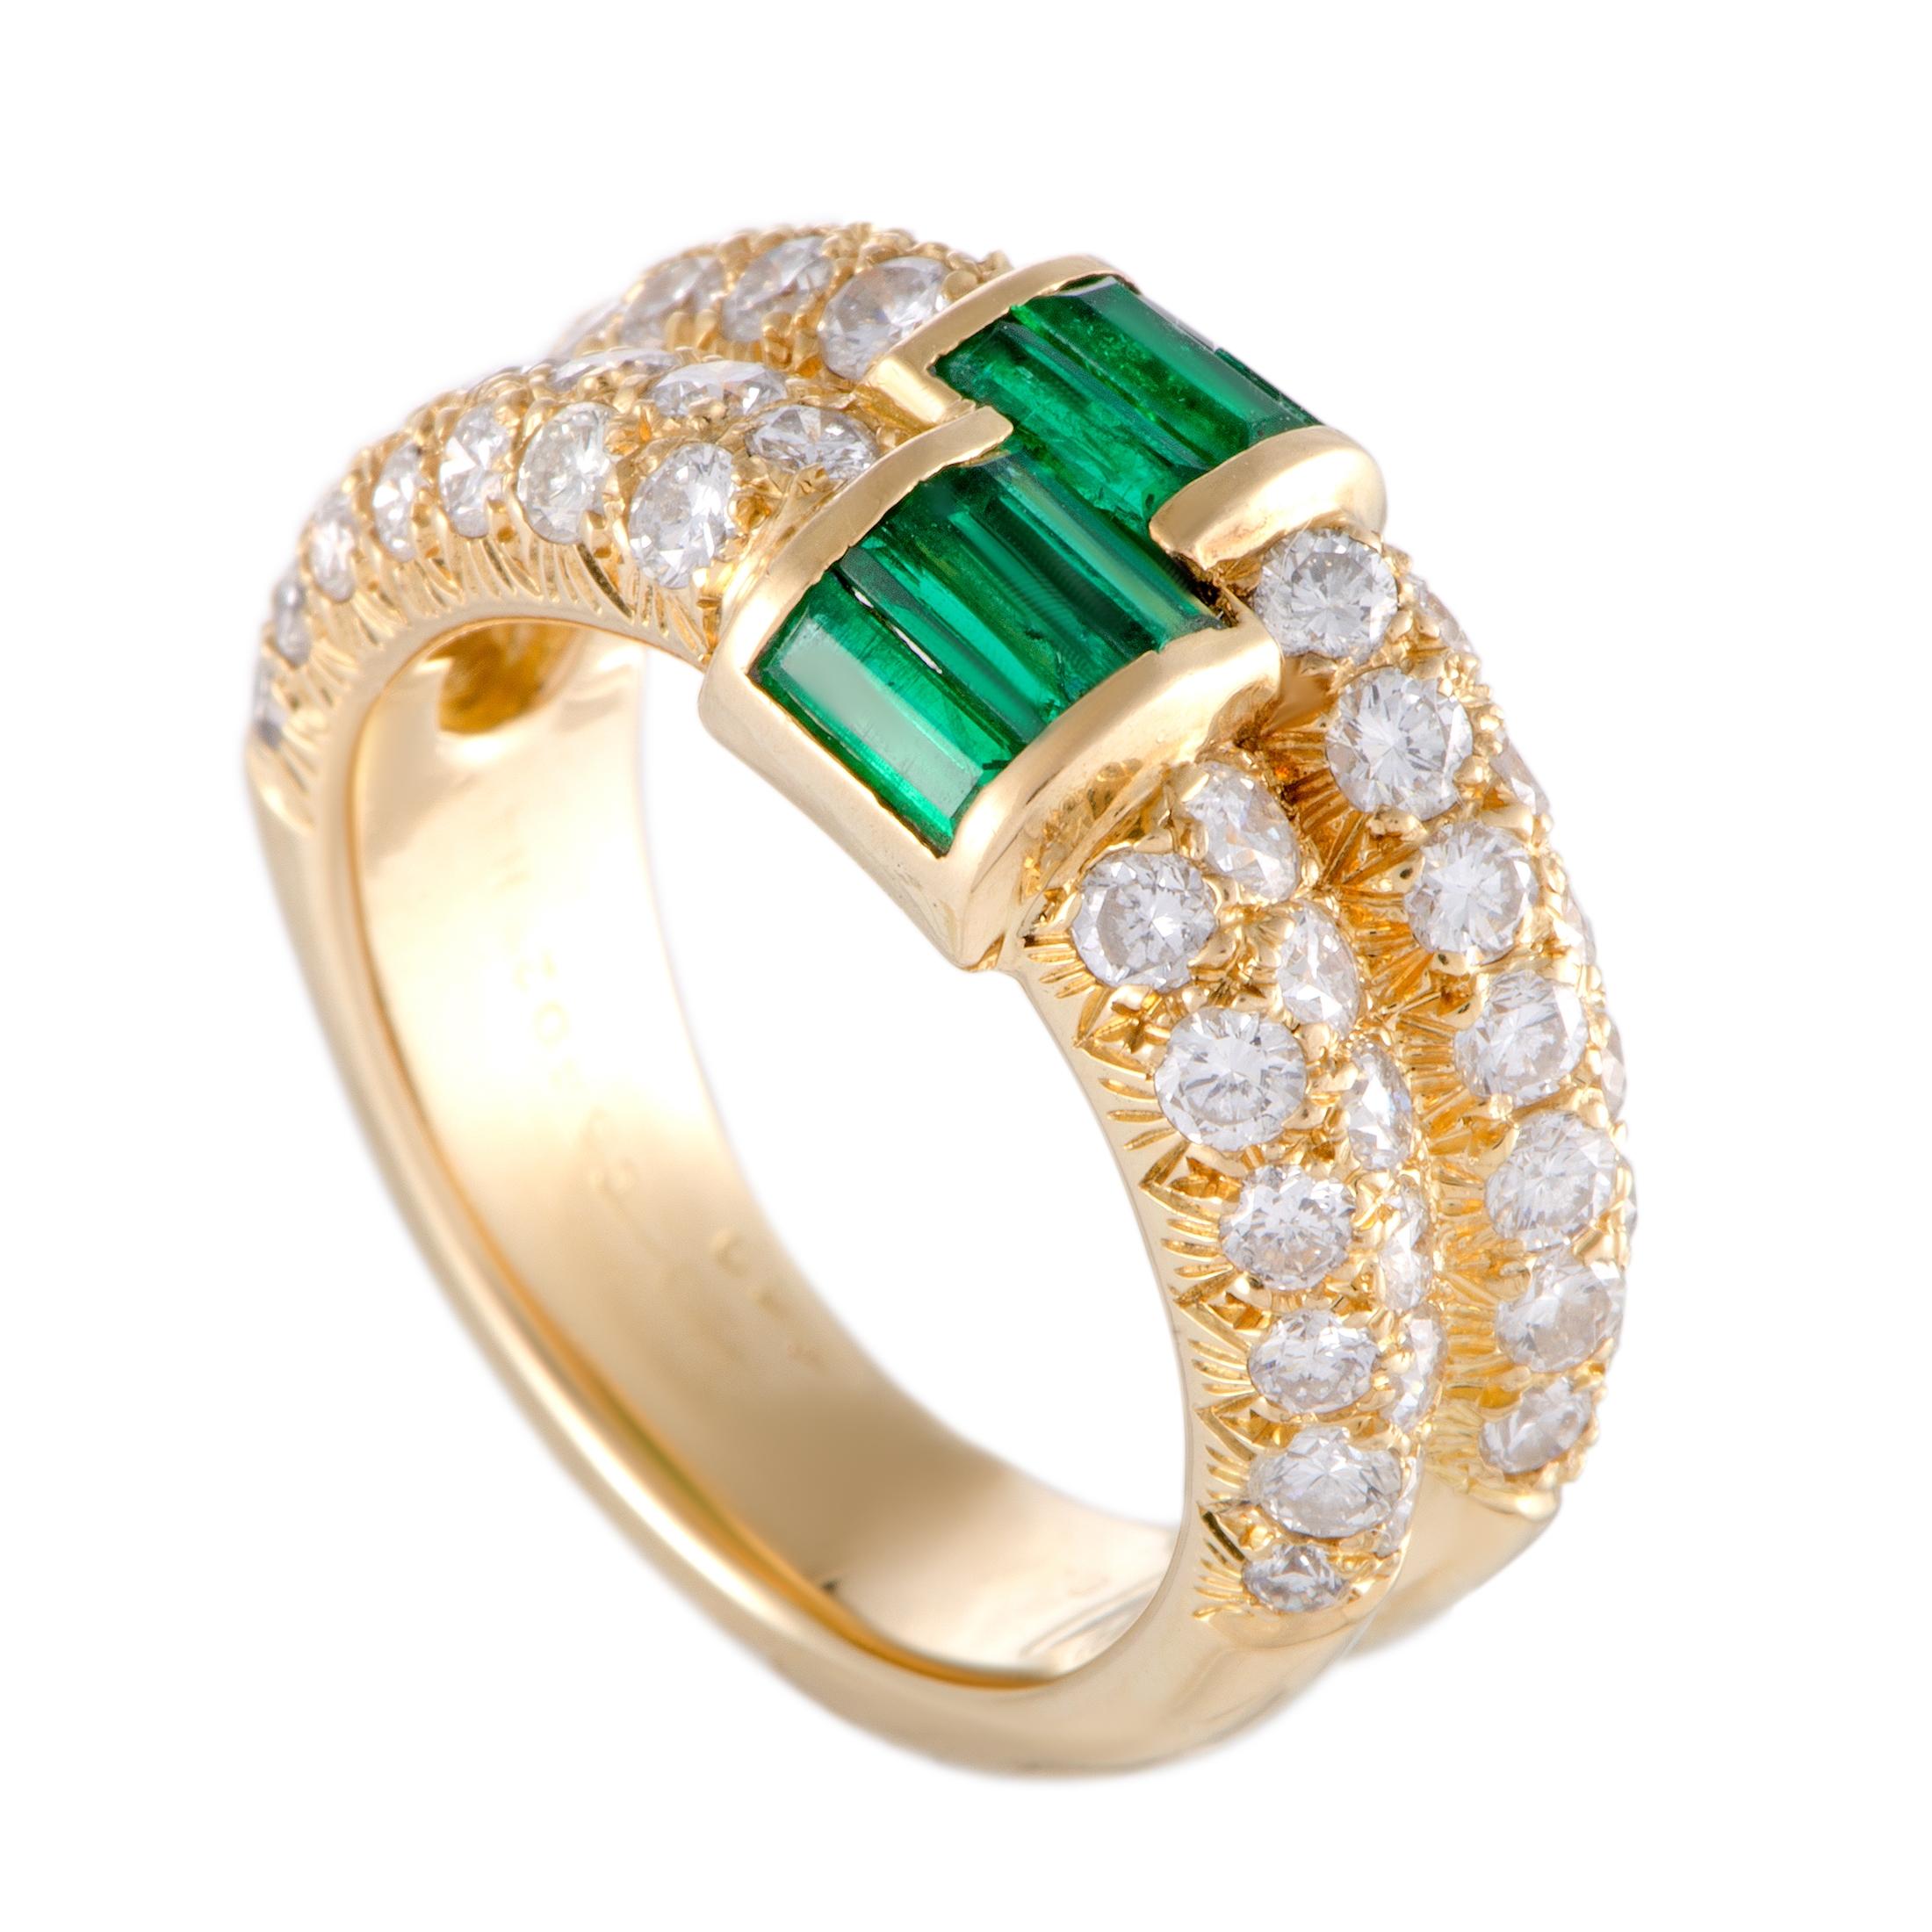 Van Cleef & Arpels 18 Karat Gold Diamond and Emerald Baguettes Double Band Ring